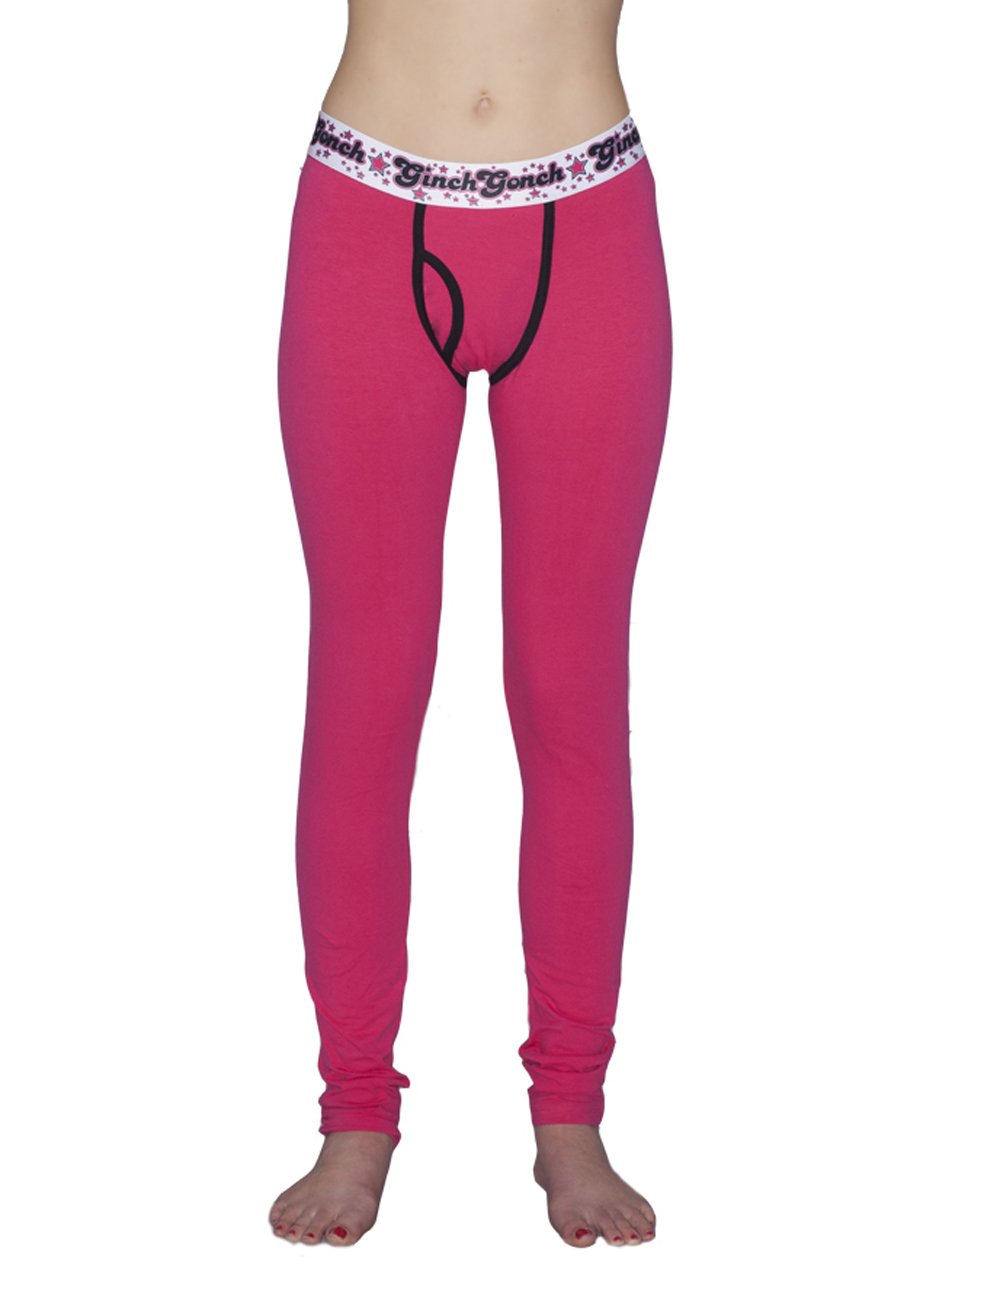 GG Ginch Gonch Mean Pink leggings women's long underwear, y front with pink fabric and black trim with black, white, and pink printed waistband front 